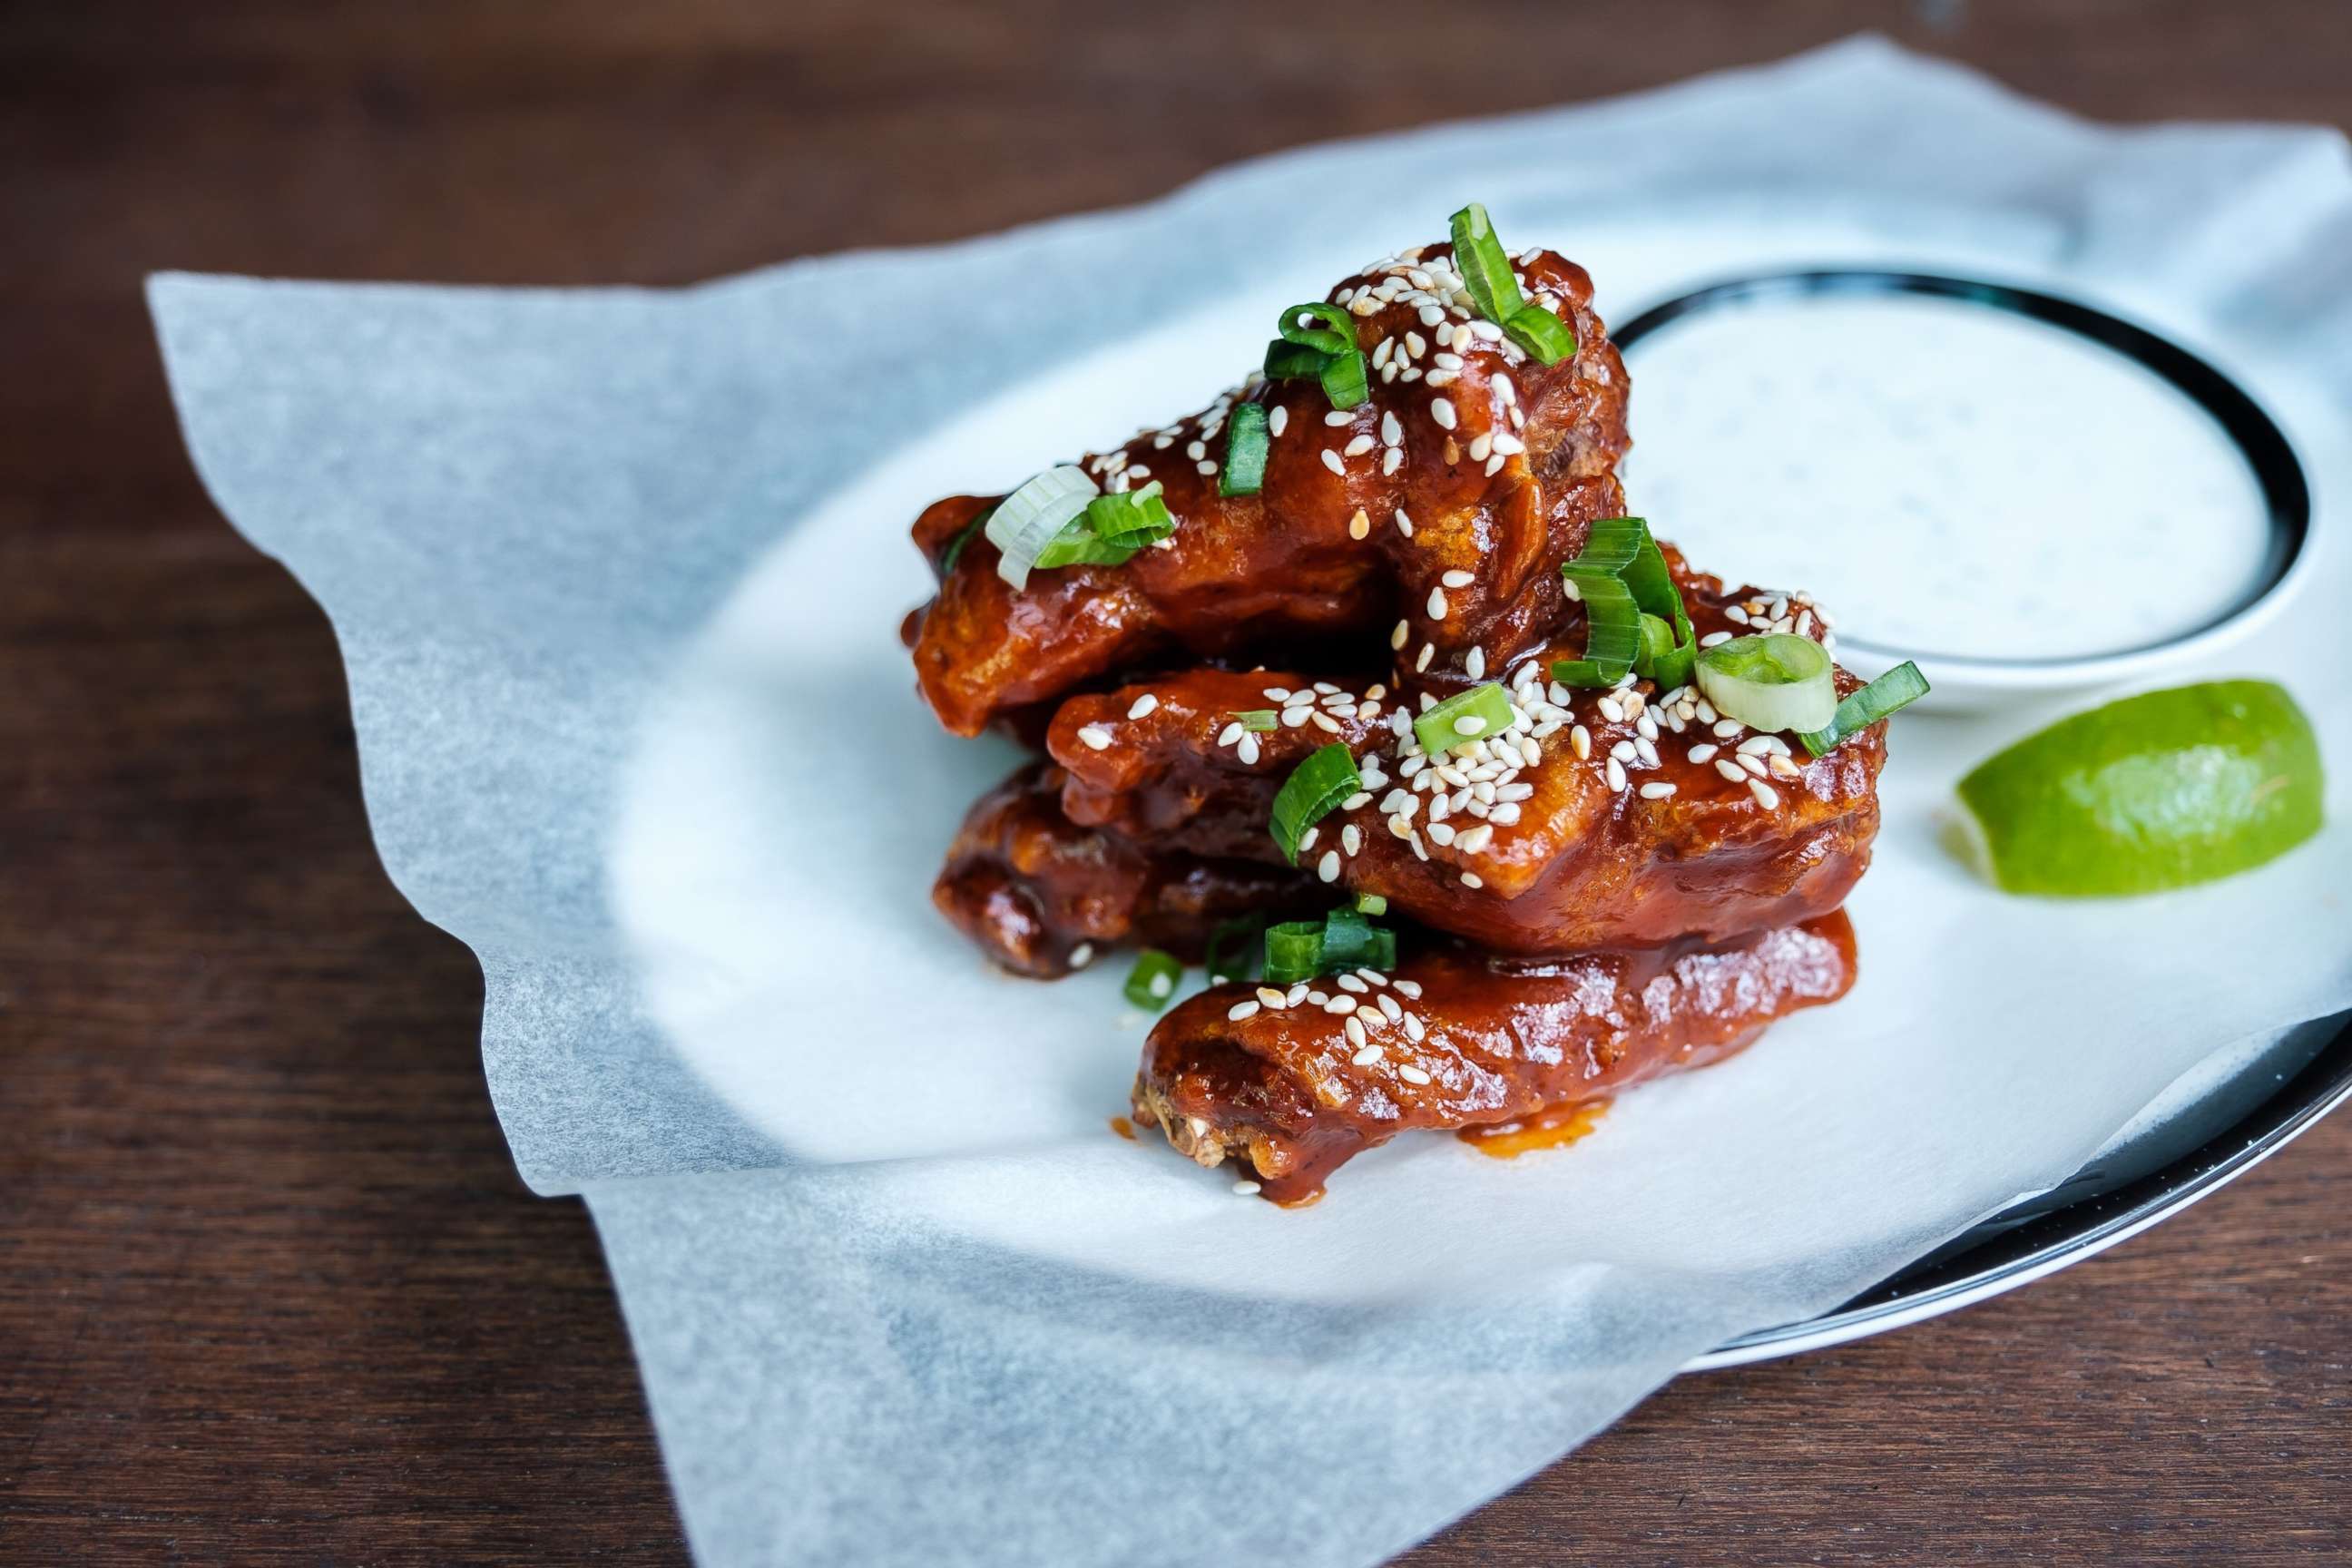 PHOTO: Upgrade your game-day grub this year with Korean barbecue wings from the mastermind behind Black Tap Craft Burgers and Beer.